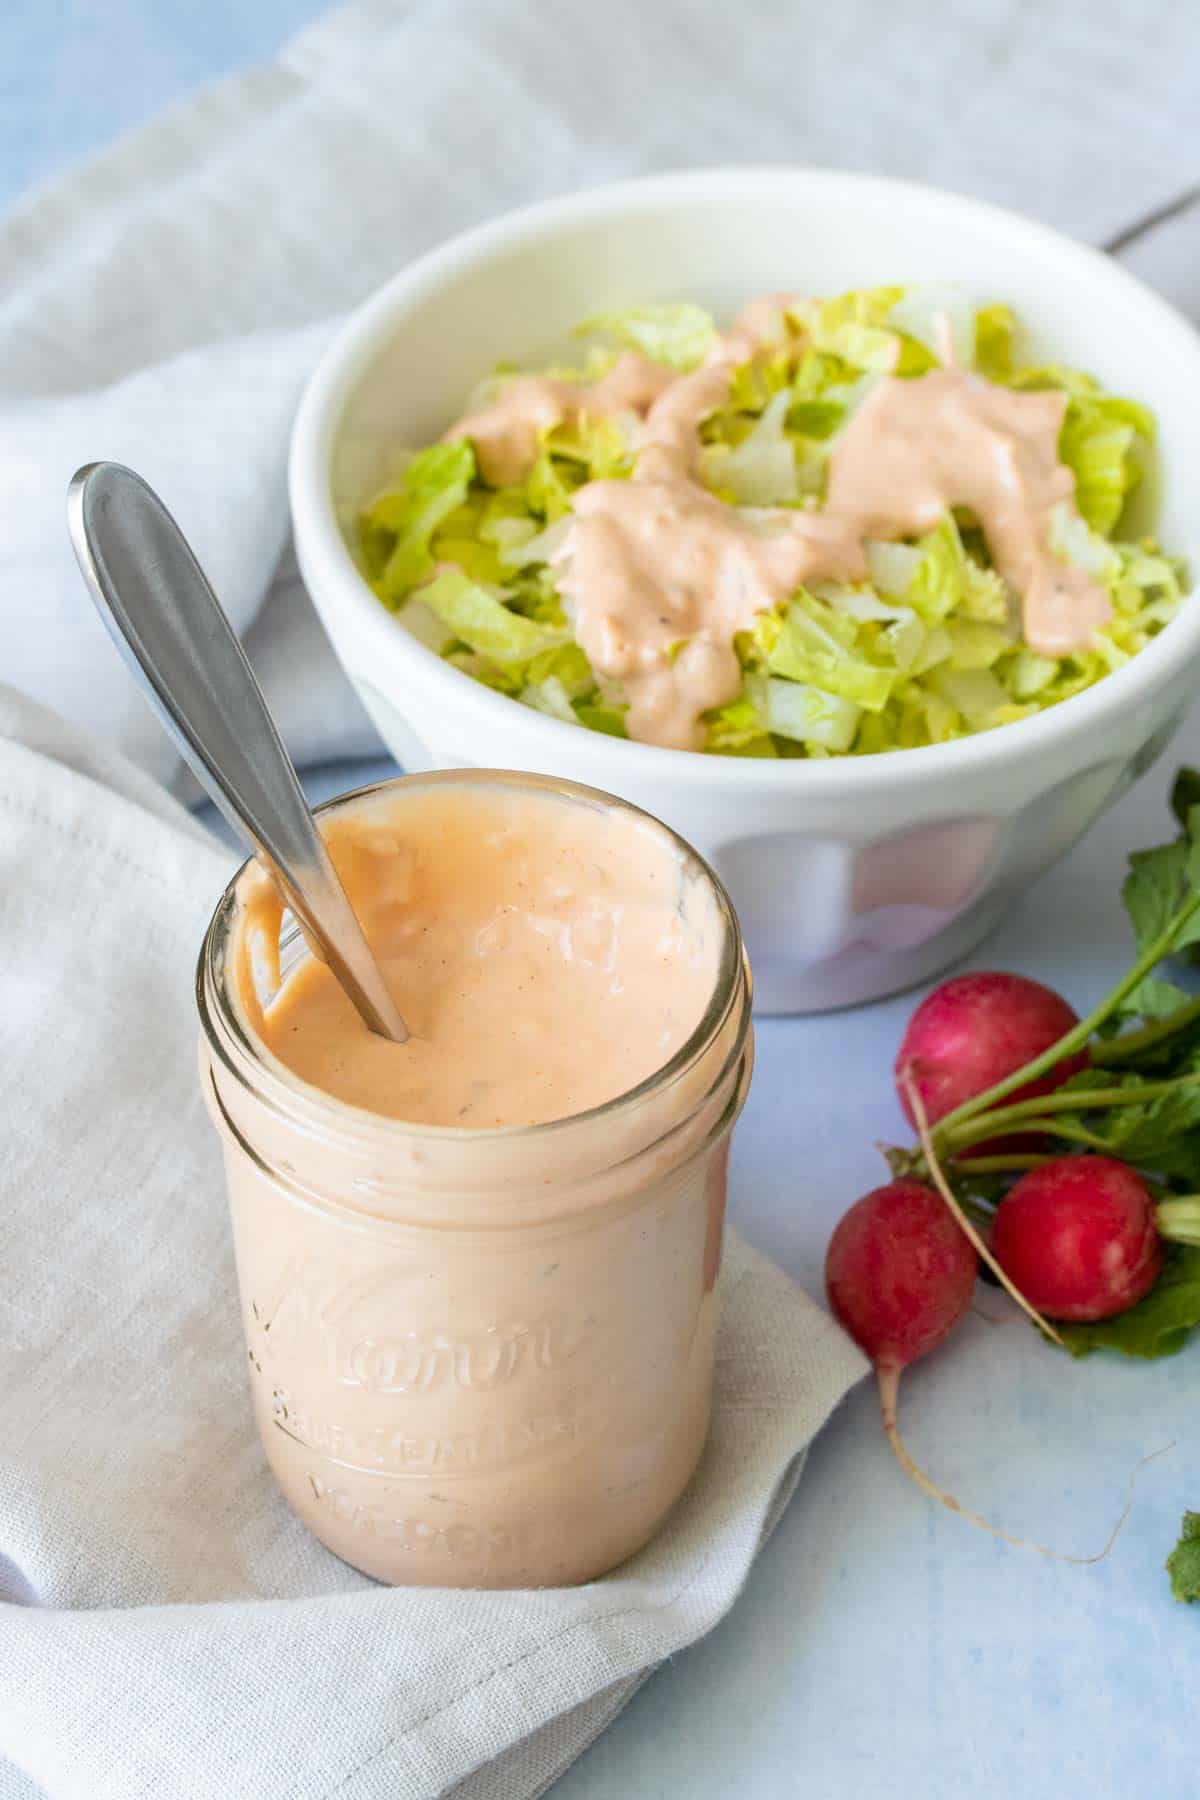 A glass jar with thousand island dressing sitting on a light colored napkin in front of a bowl of salad